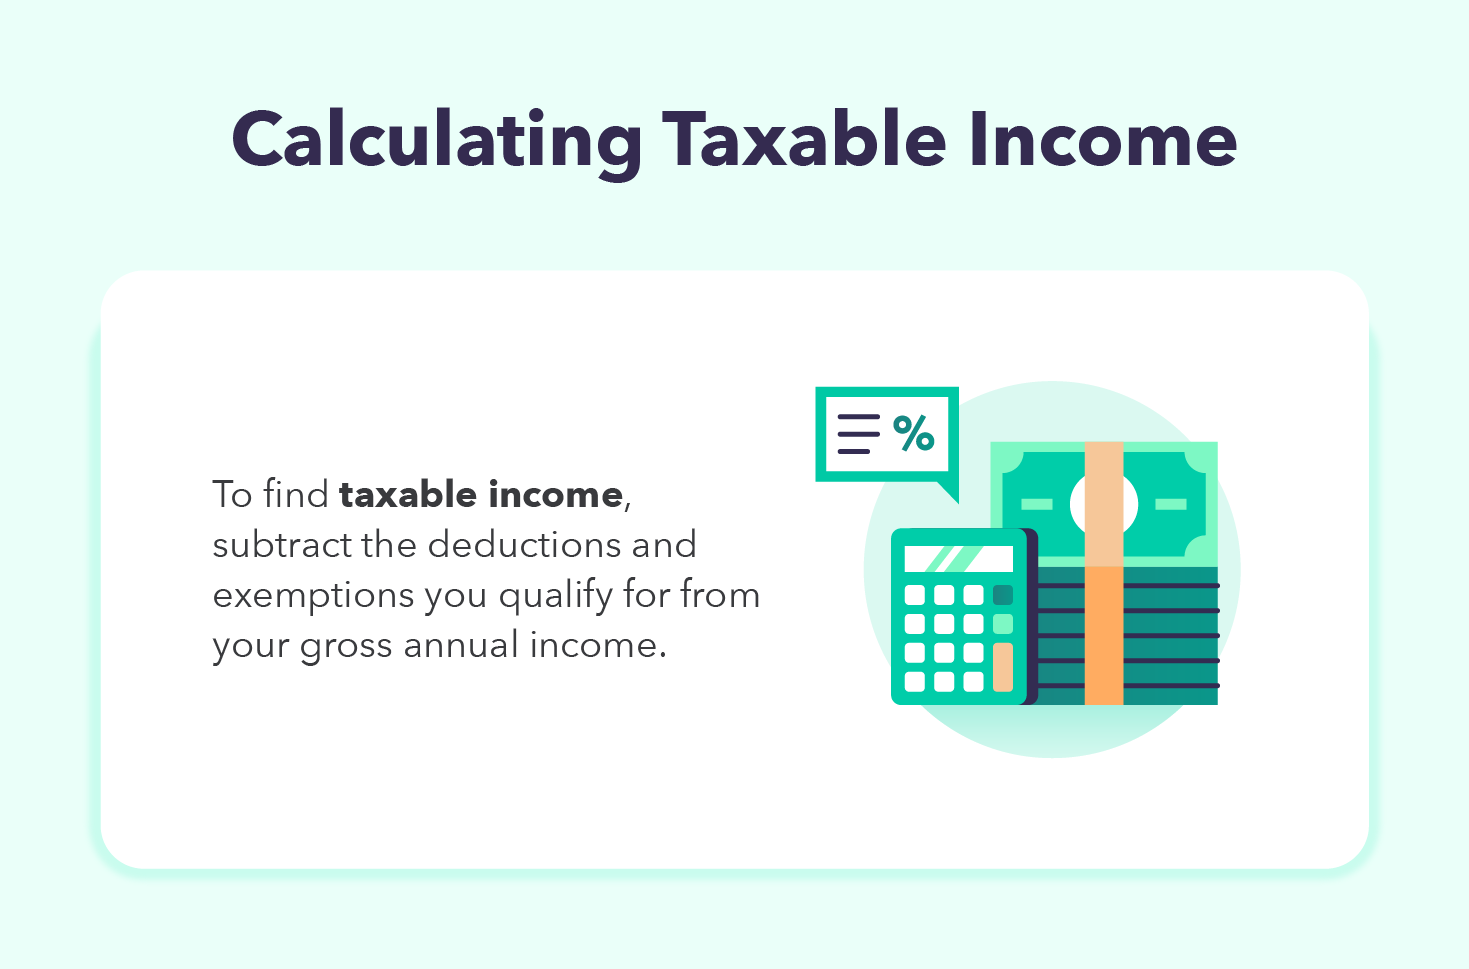 To figure out taxable income, subtract the deductions and exemptions for which you qualify from your gross annual income. 